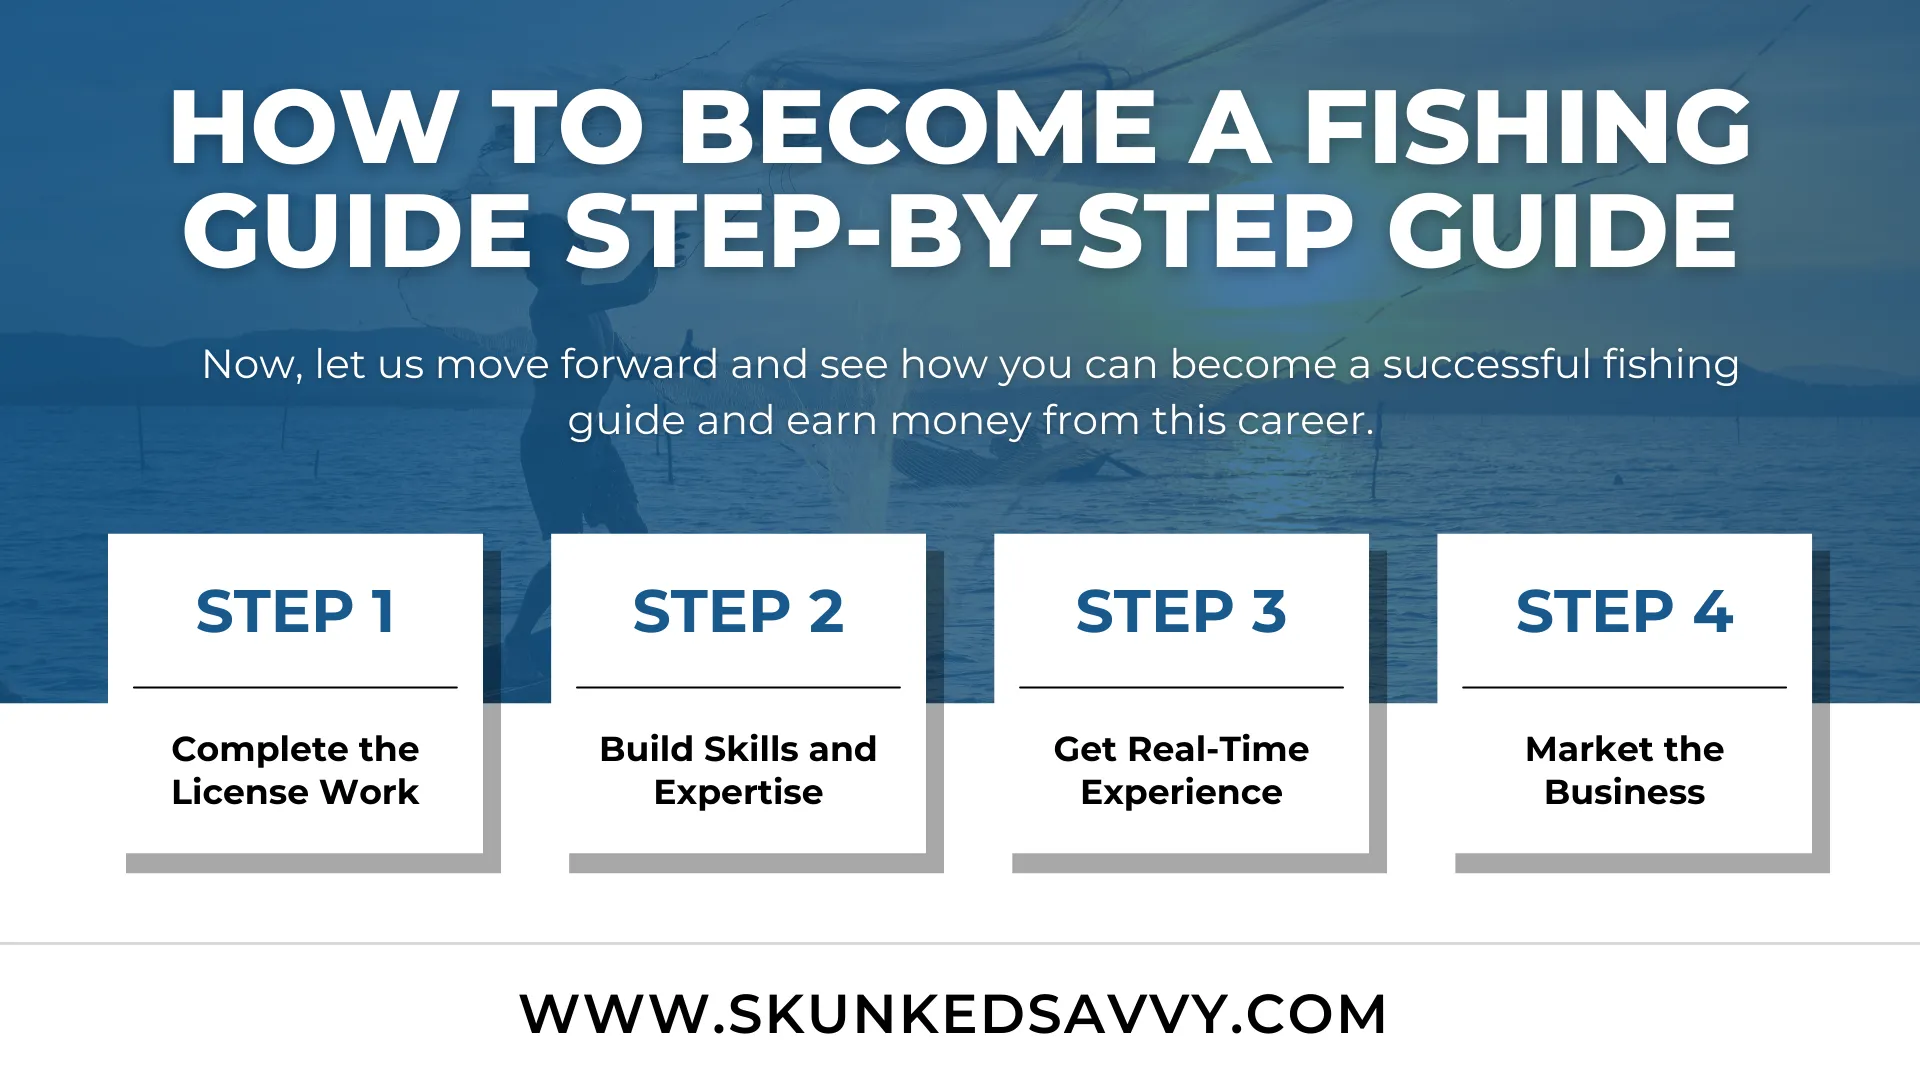 How to Become a Fishing Guide Step-by-Step Guide